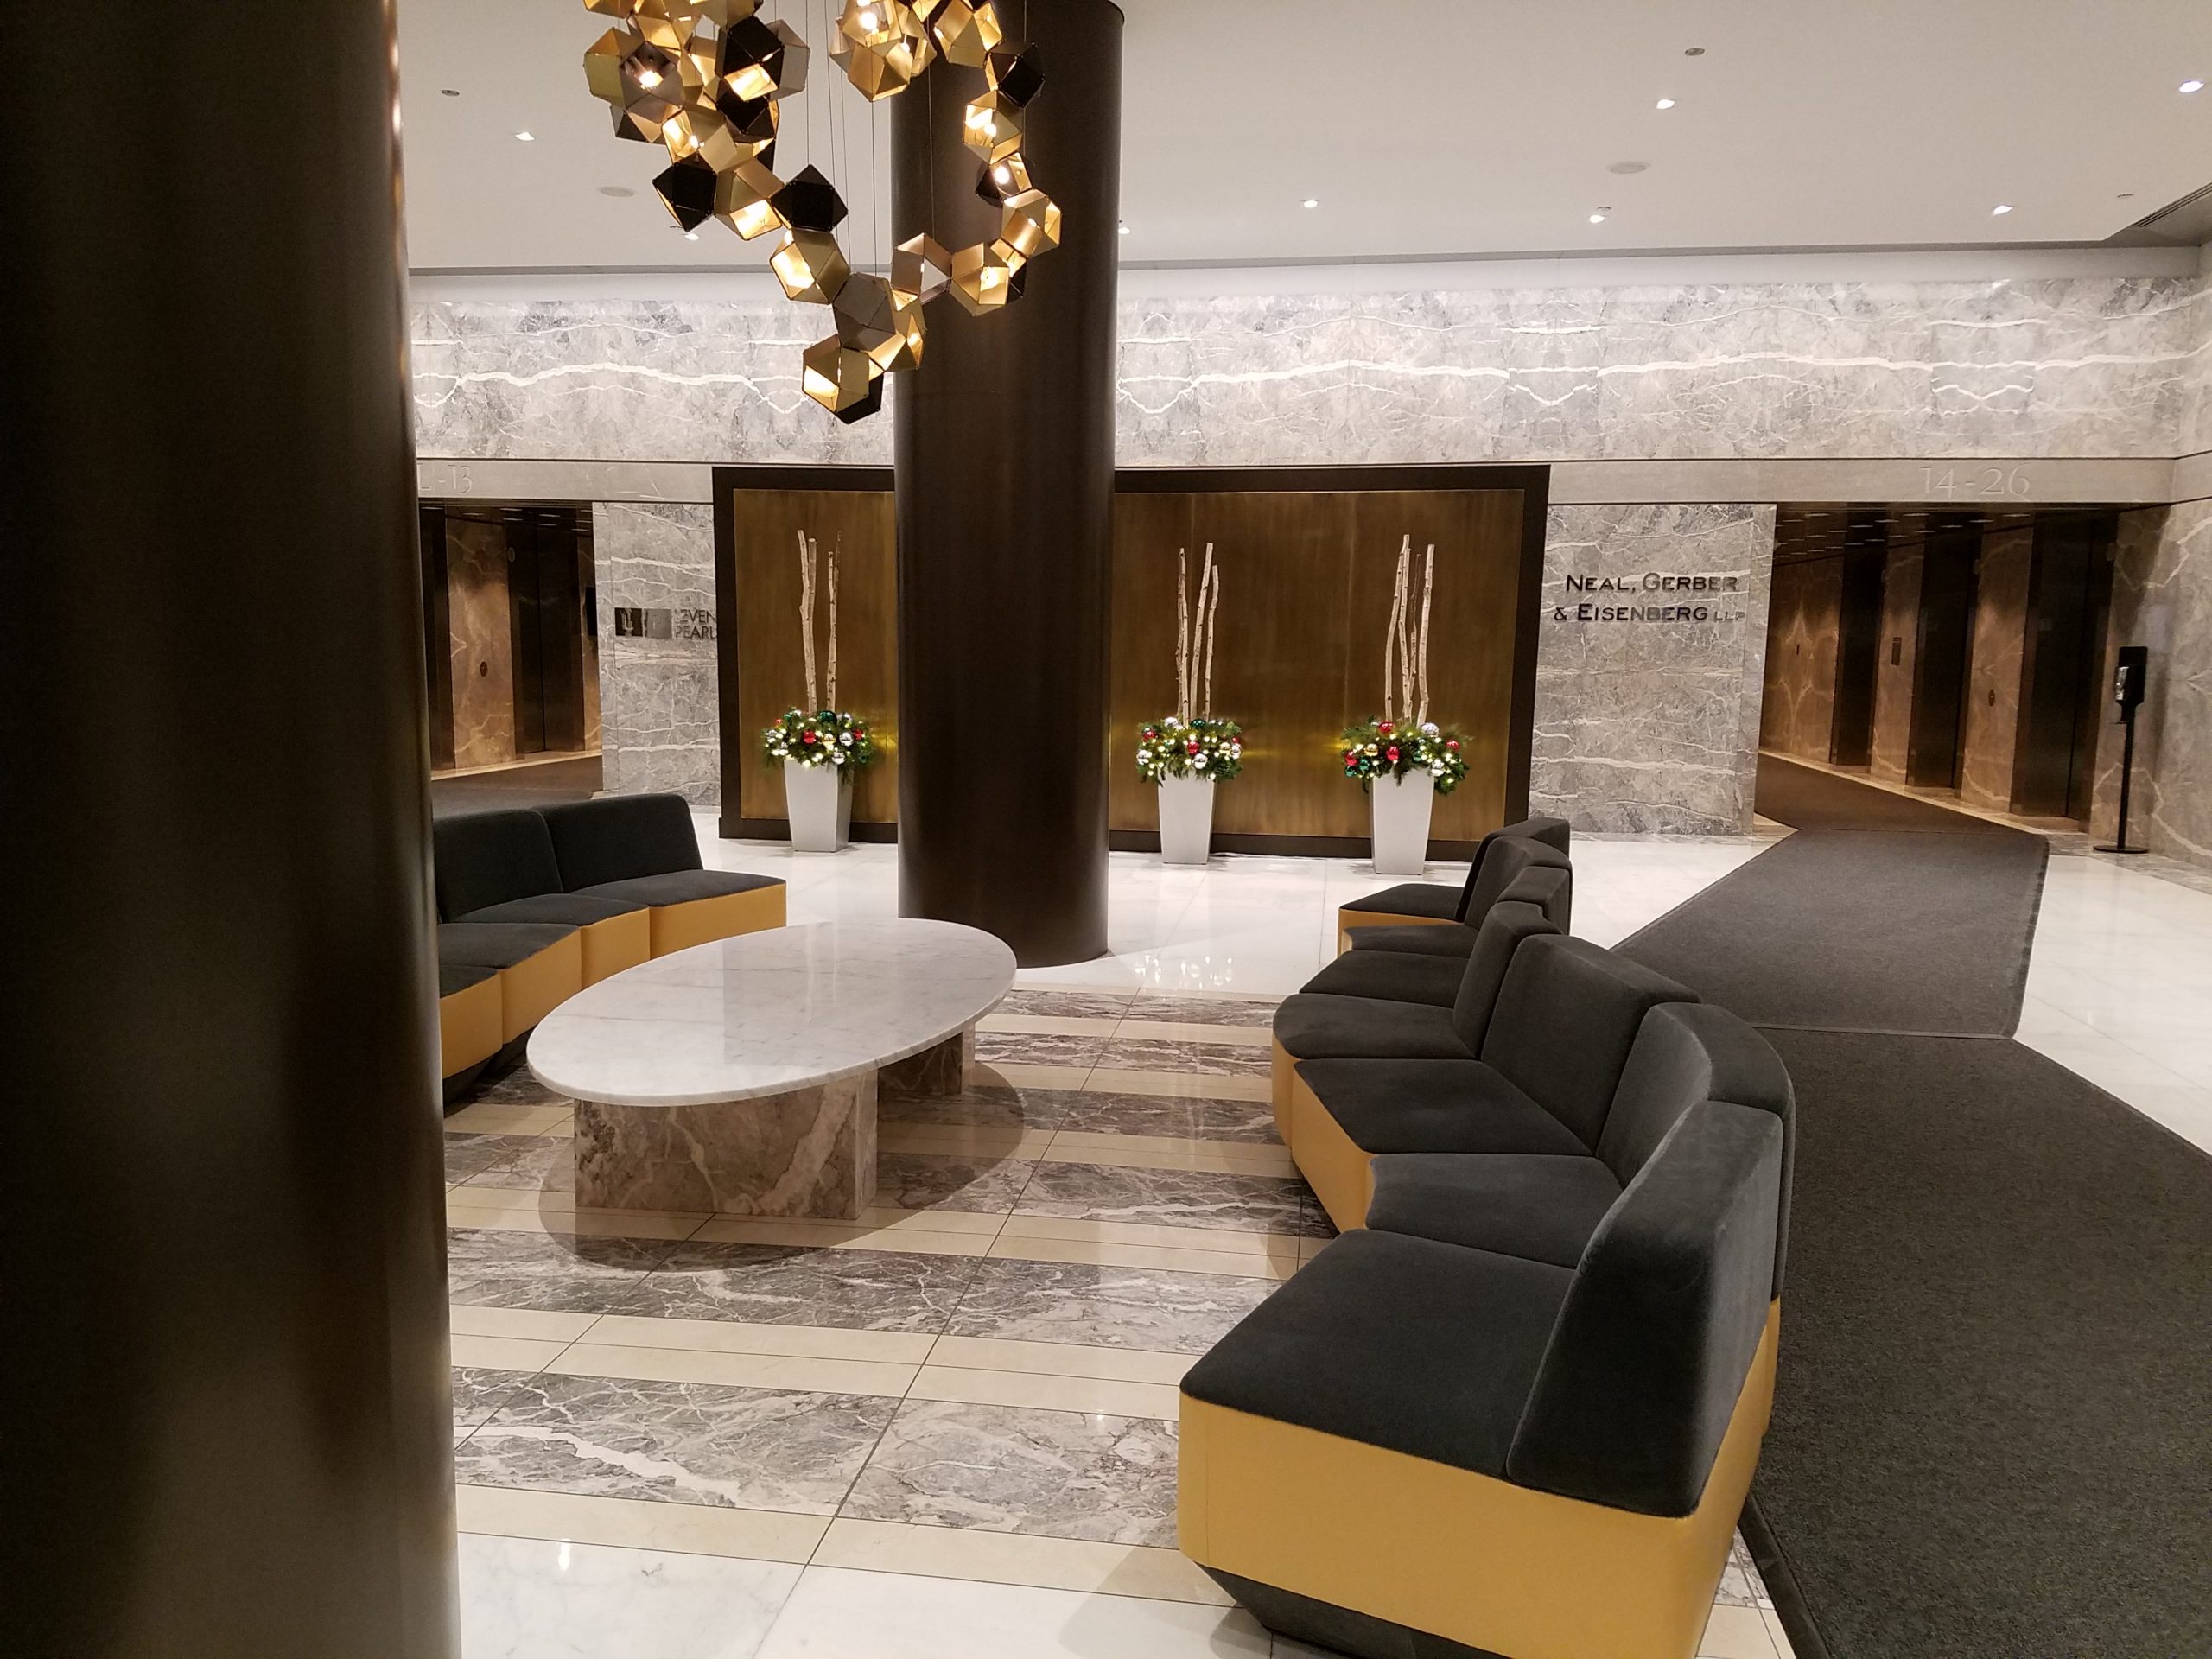 Chicago Loop Lobby Gets a Dazzling Update